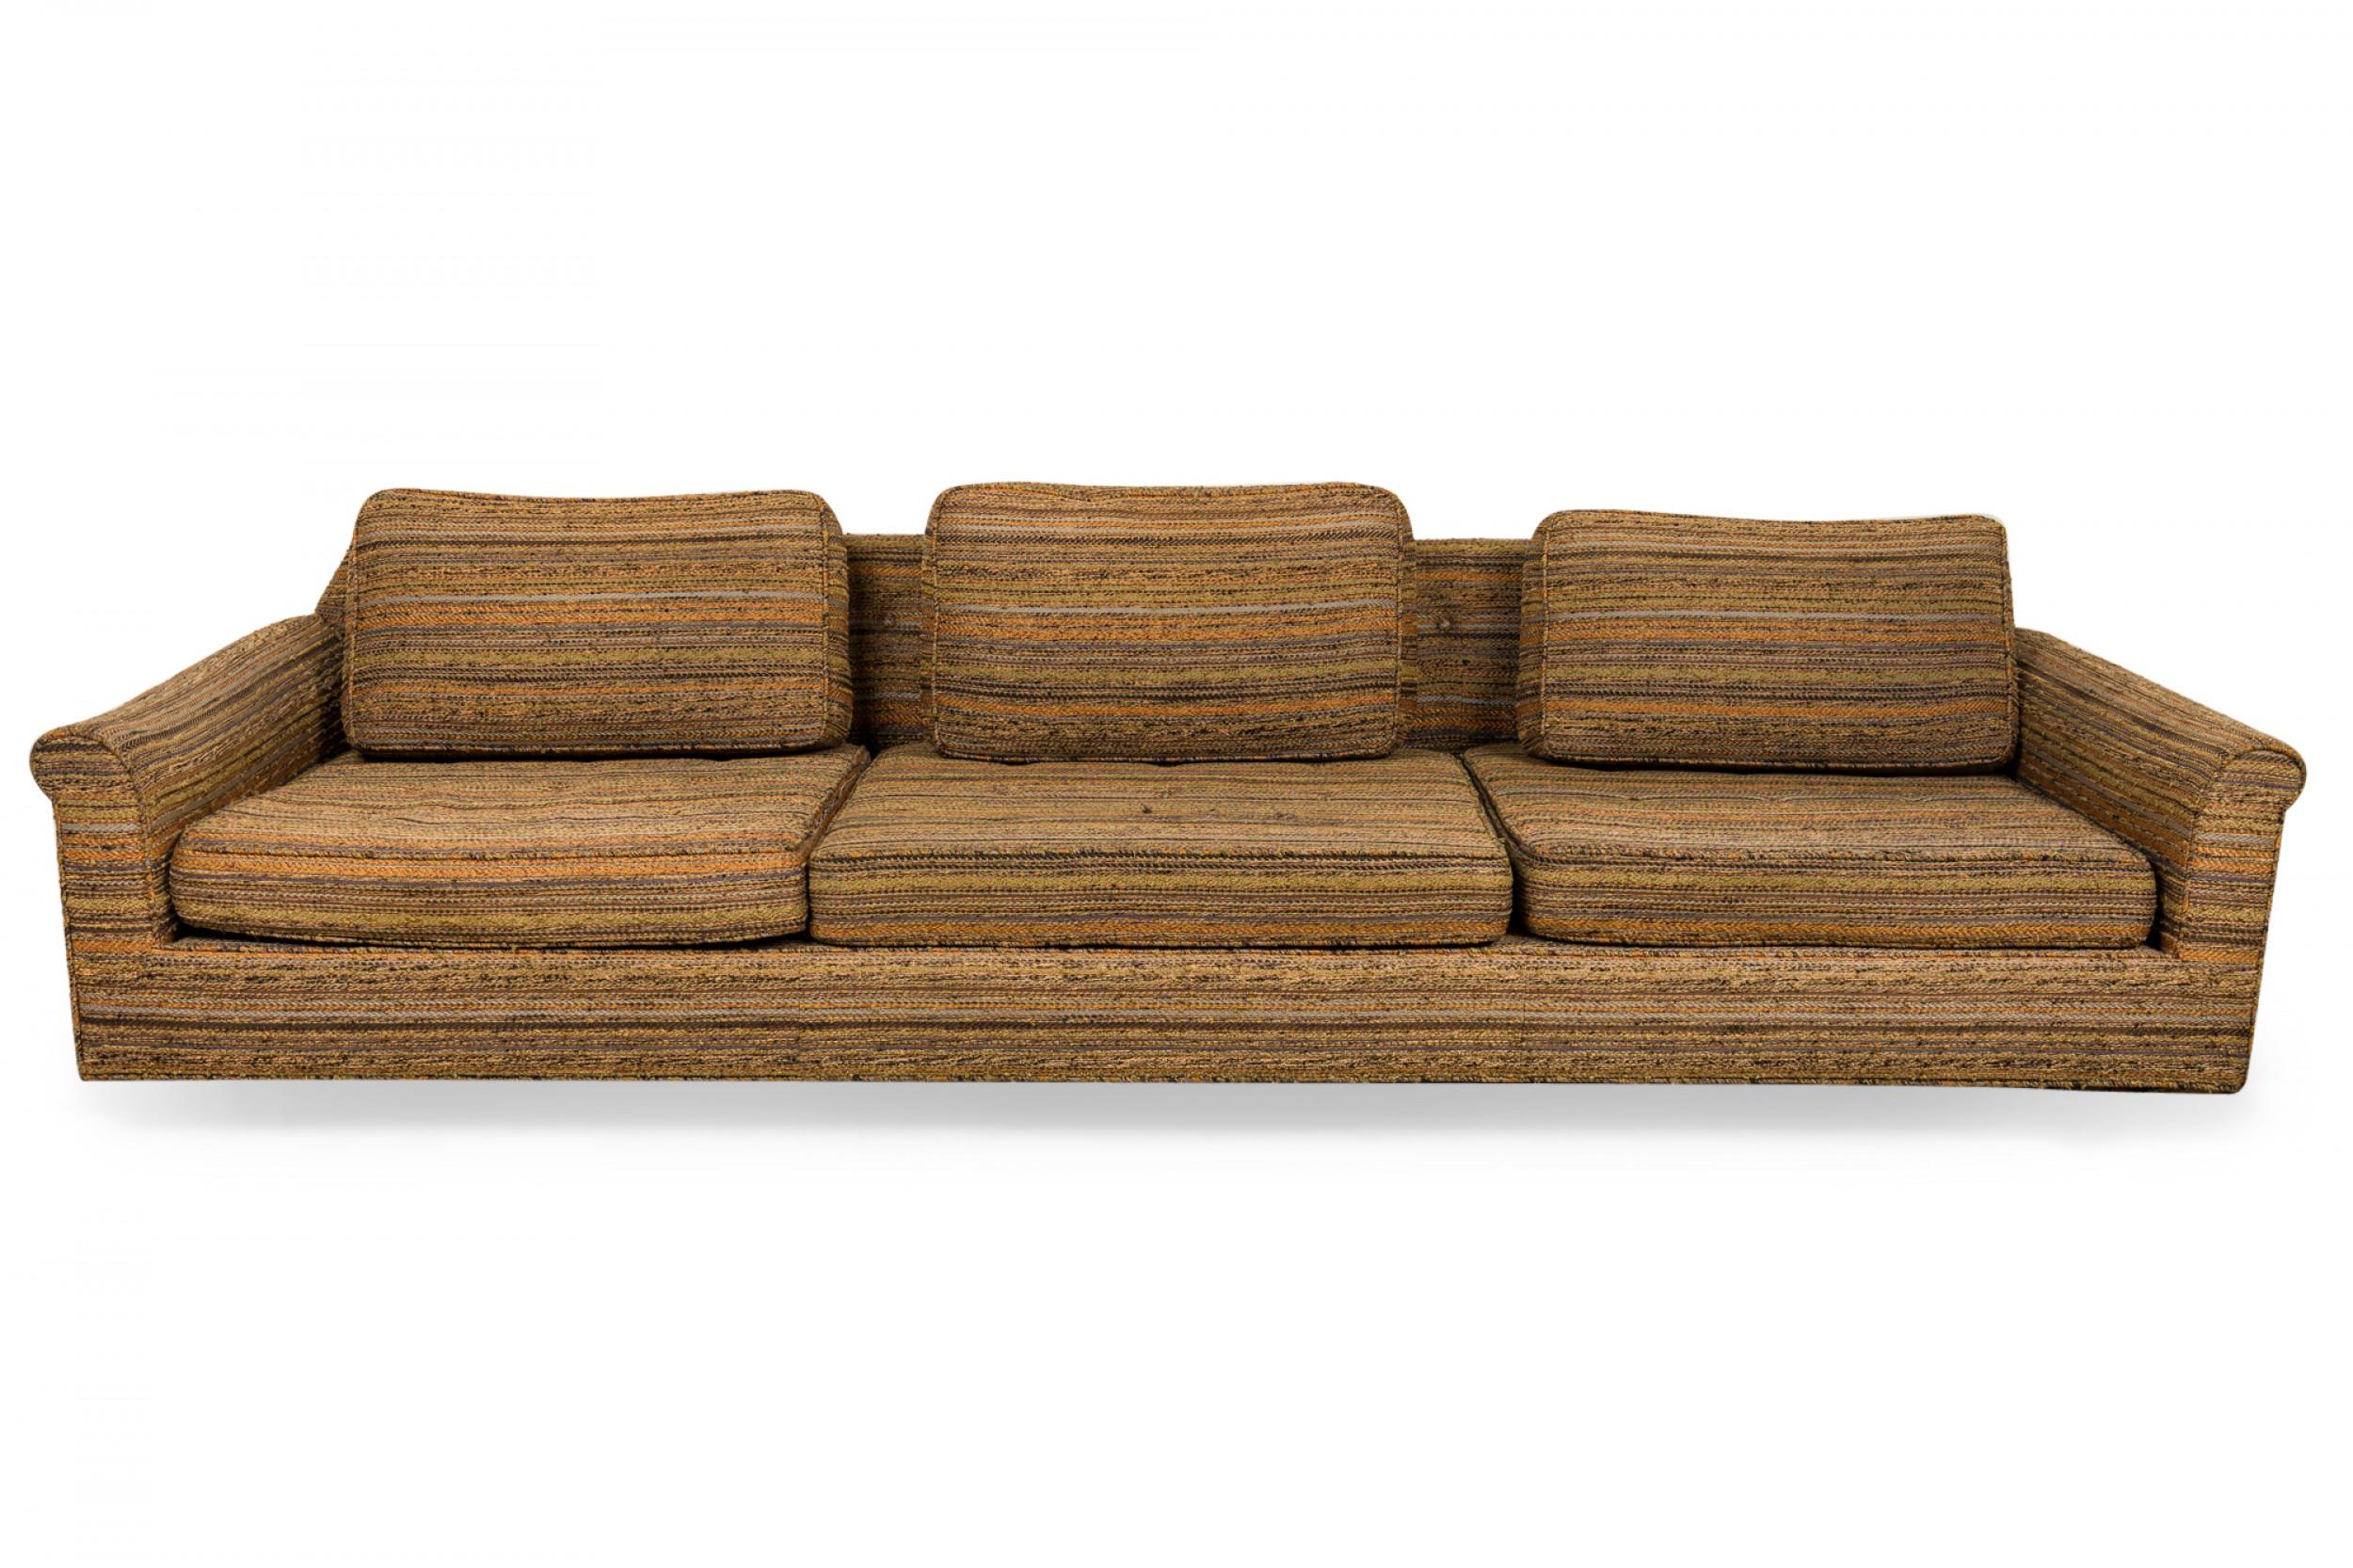 American Mid-Century 'Big Texan' oversized sofa with brown, beige, and green striped textured fabric upholstery and removable seat and back cushions. (EDWARD WORMLEY)
